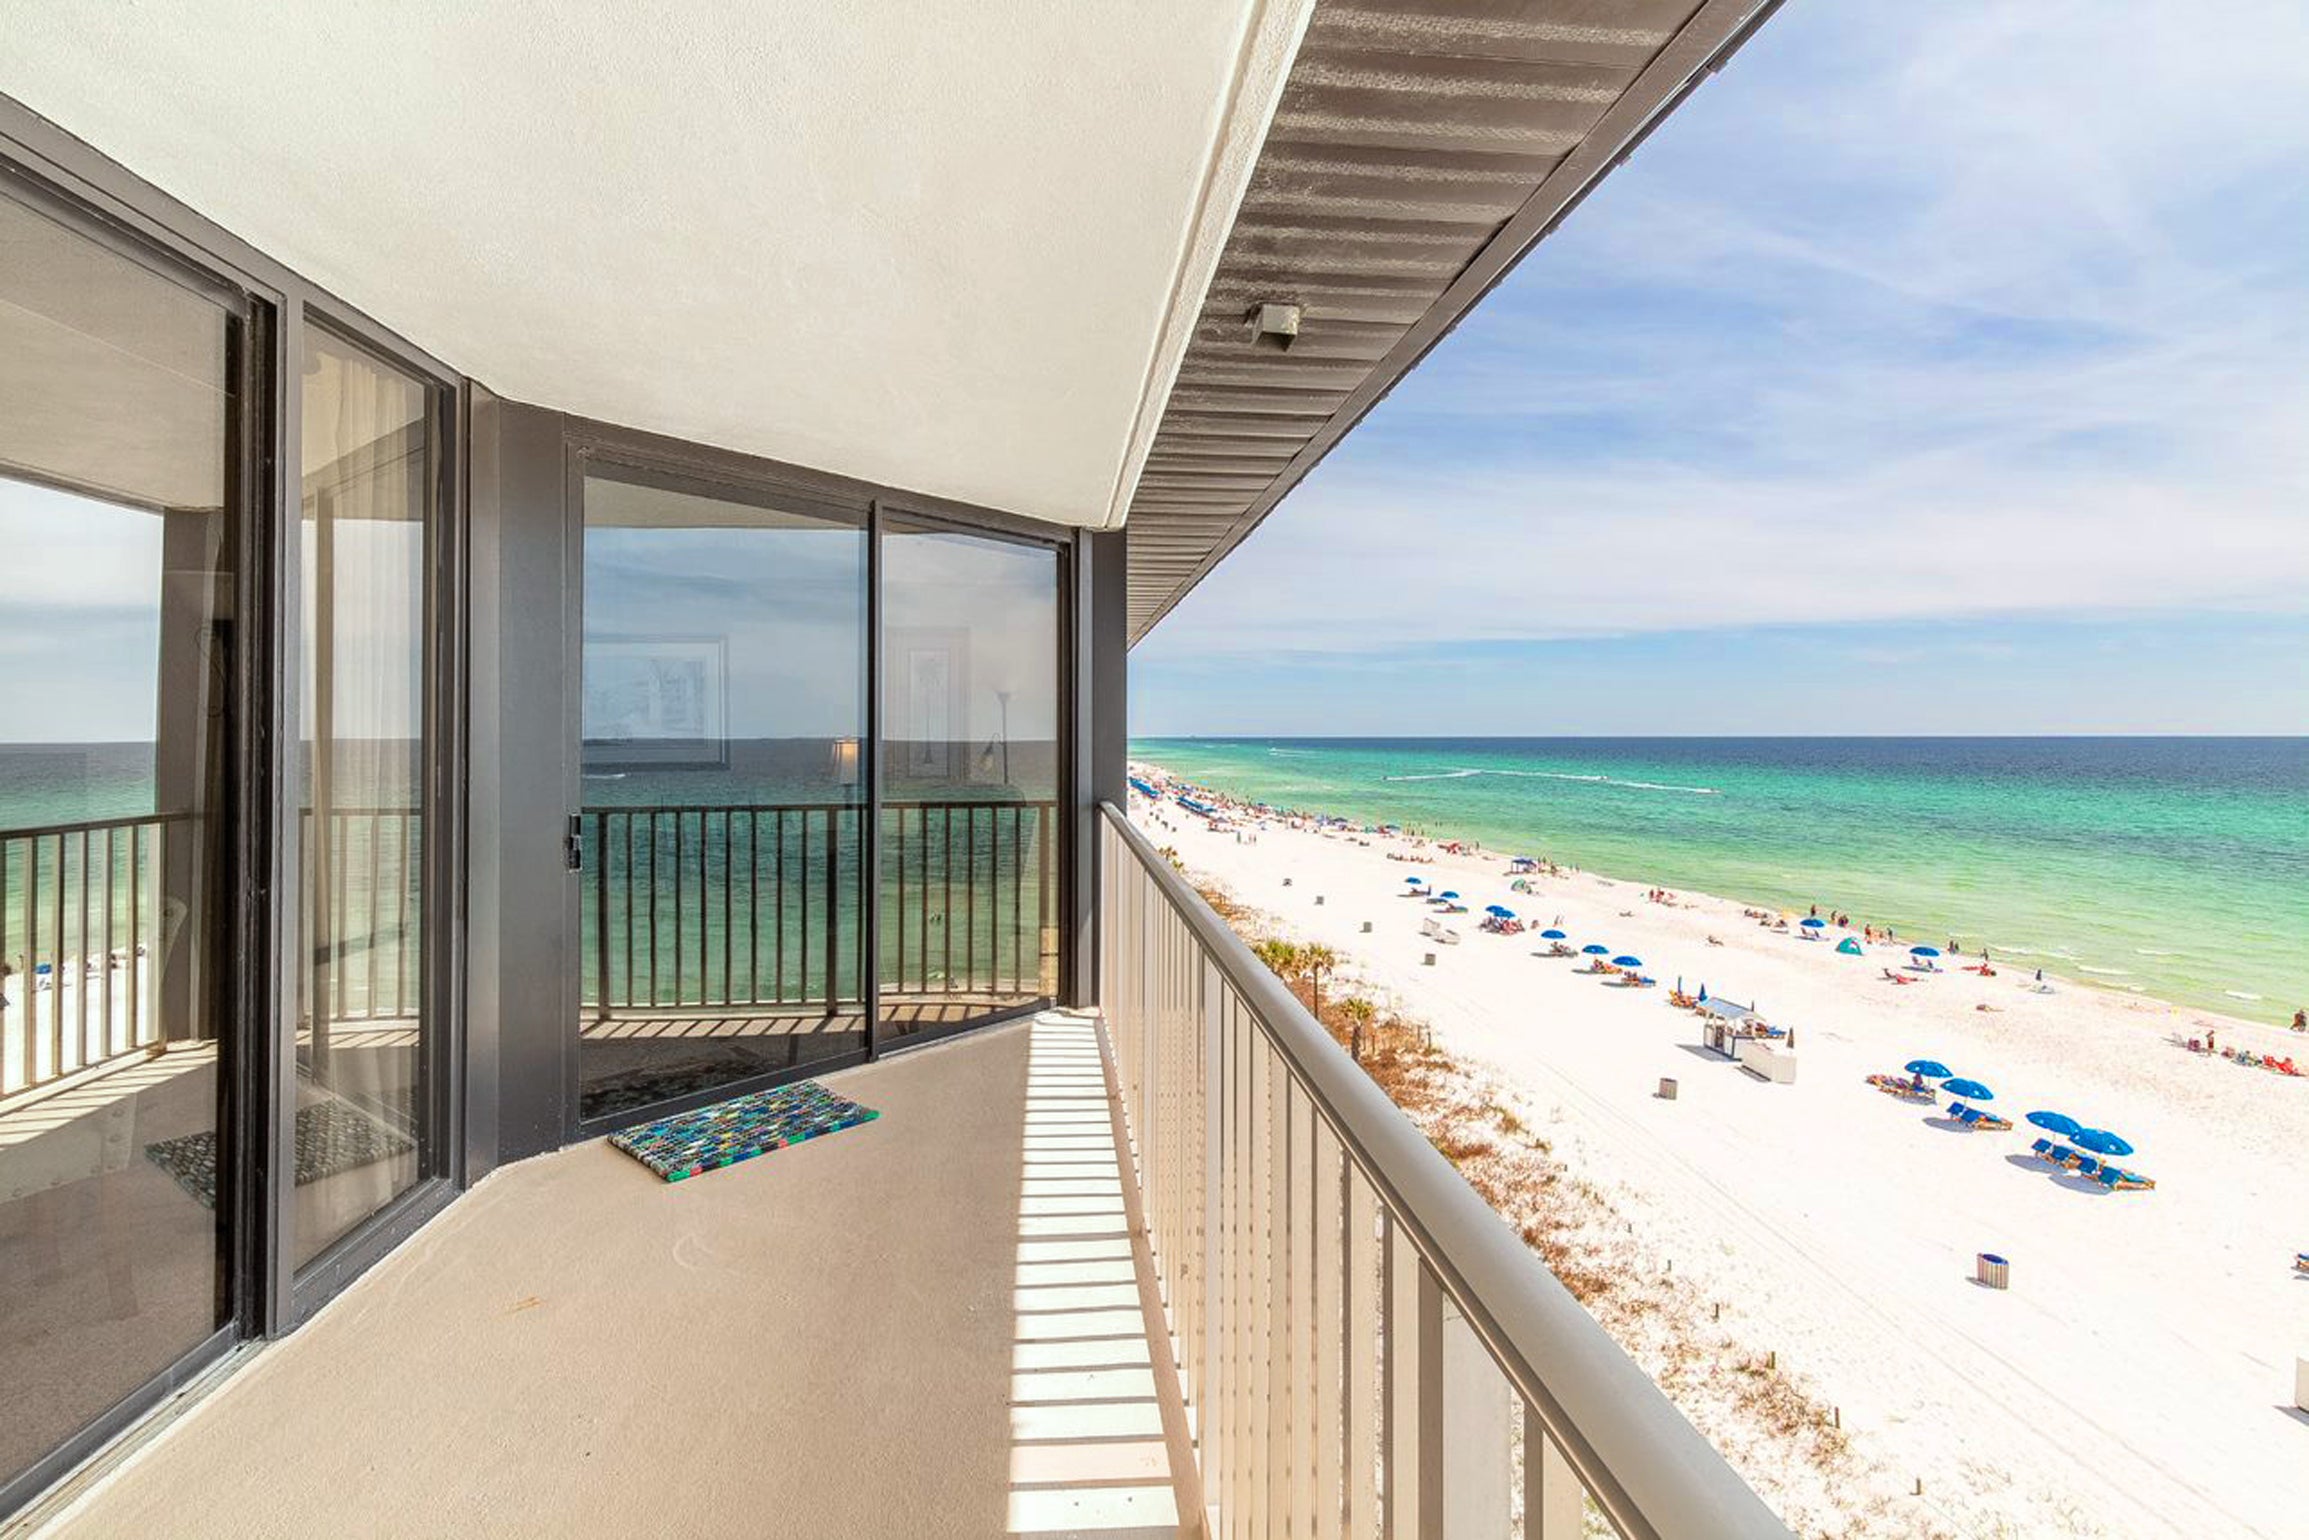 Gorgeous less crowded beach from your very private balcony.